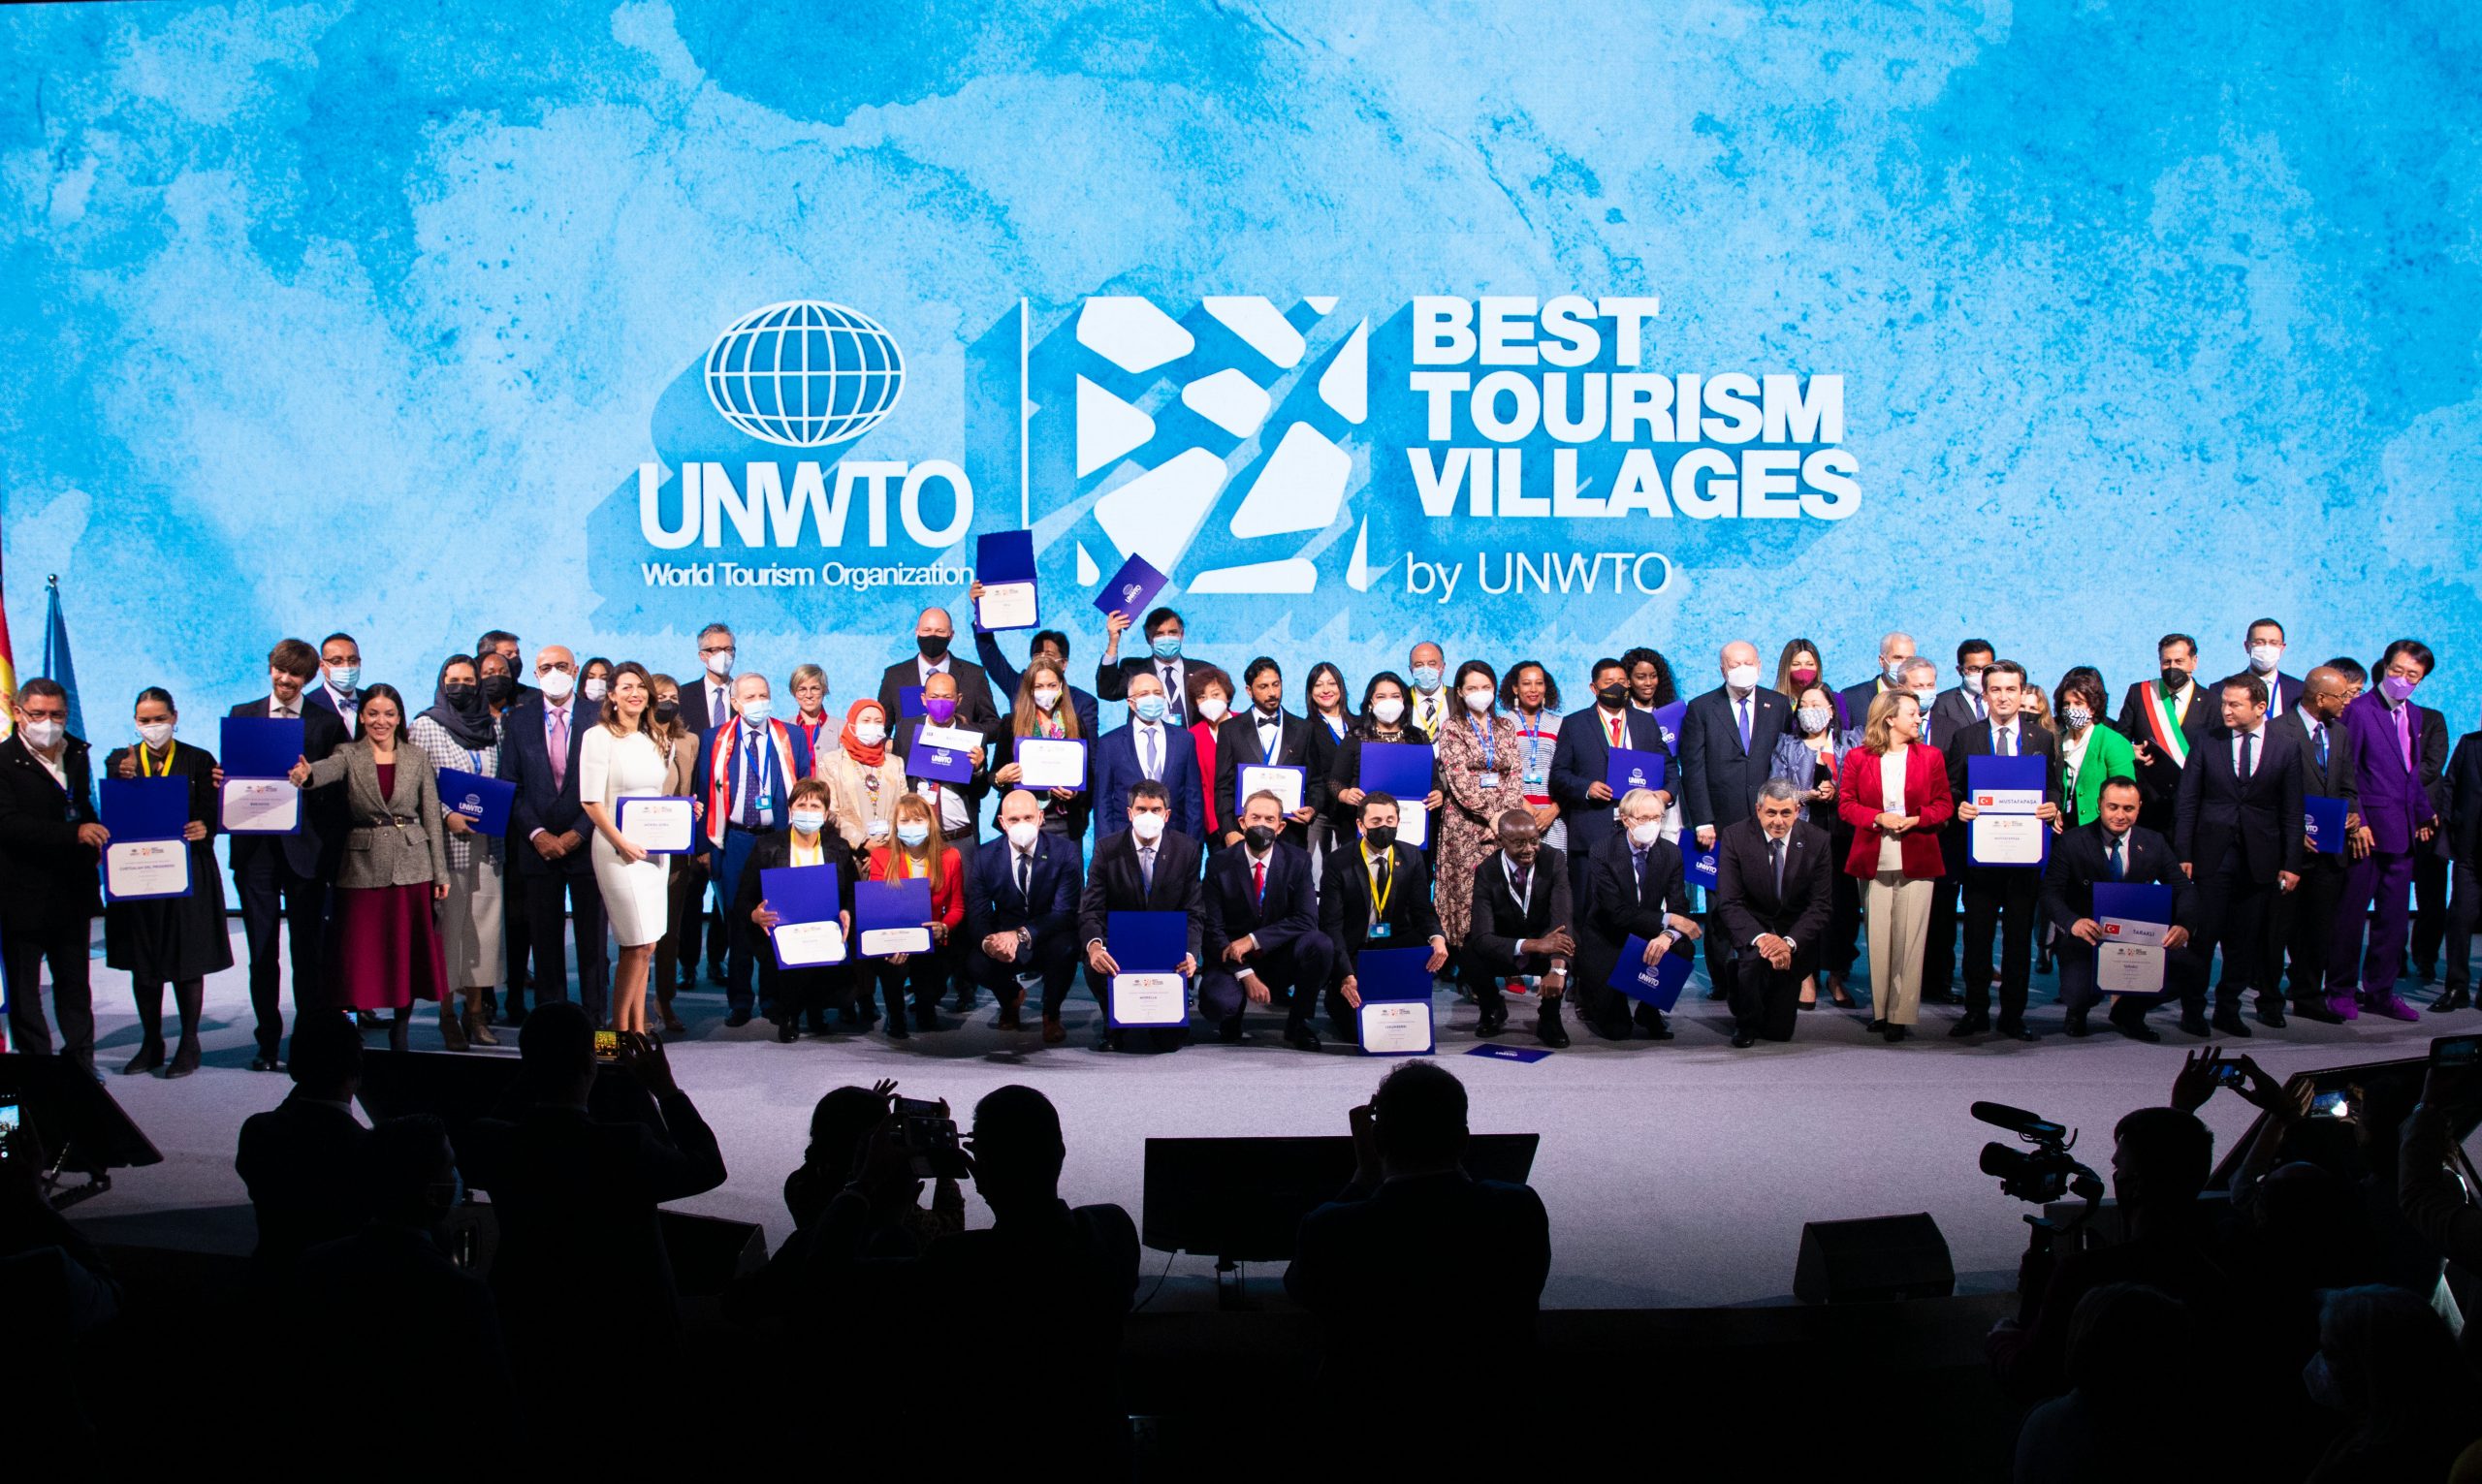 UNWTO Secretary-General invites Member States to join the Best Tourism Villages Initiative